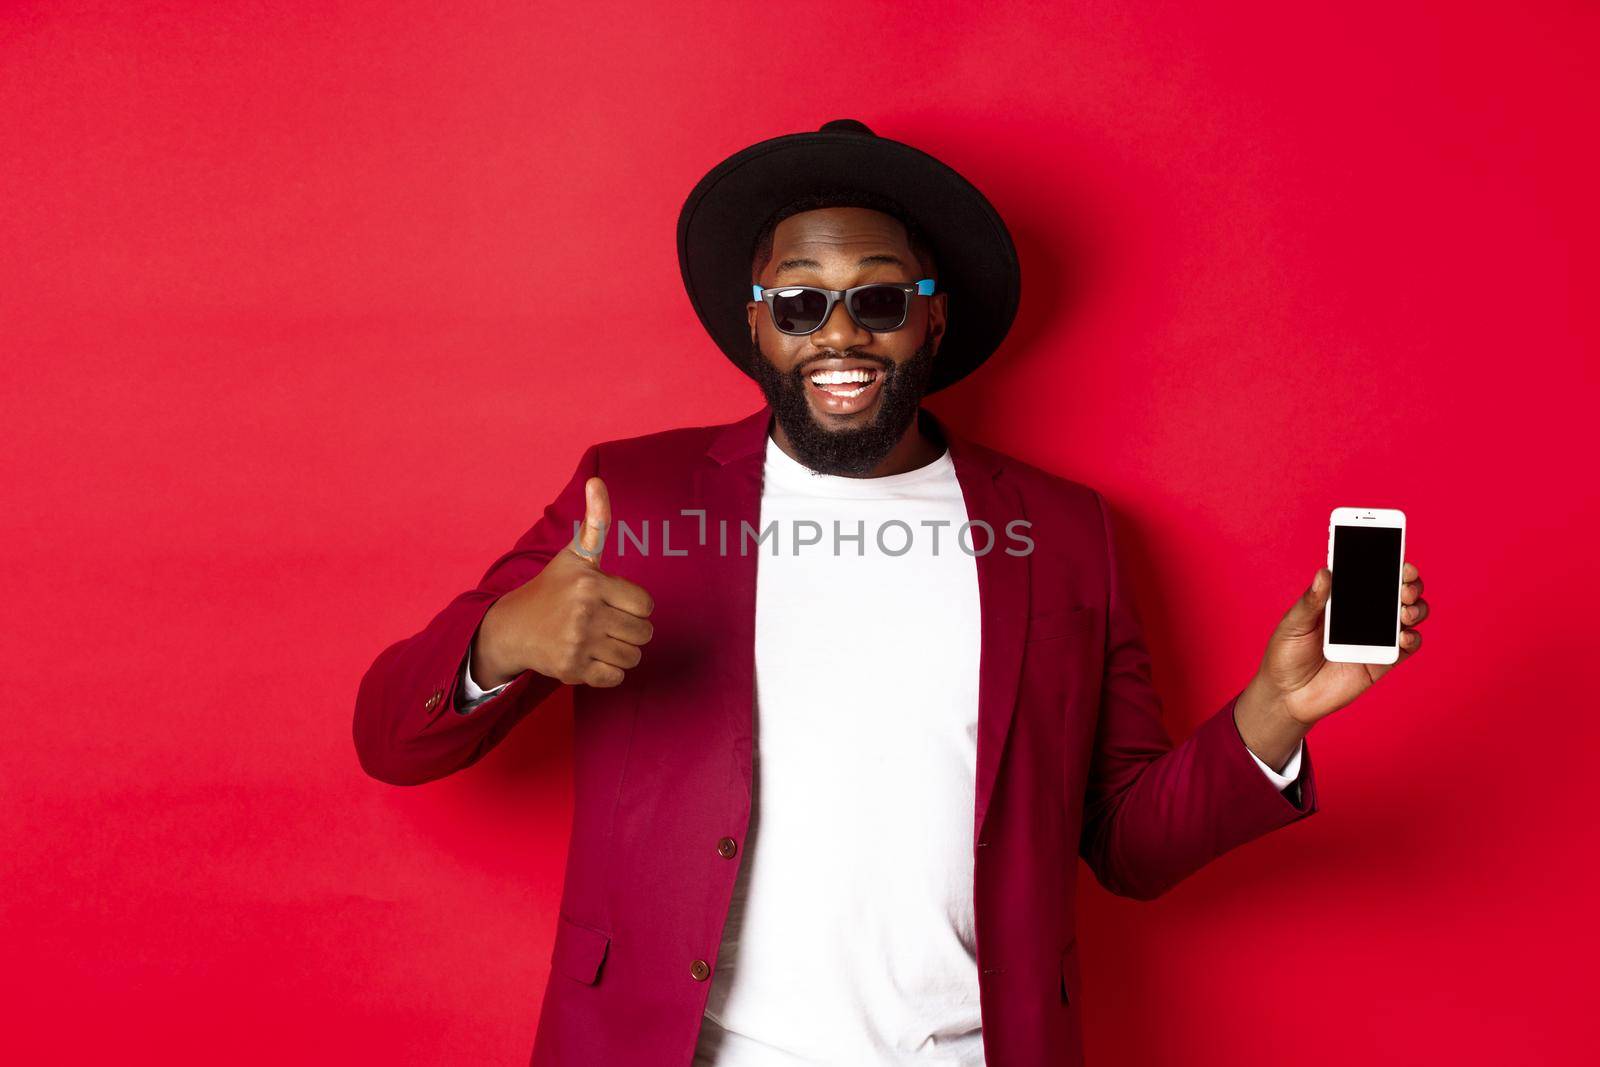 Handsome and stylish Black man showing phone screen and thumb up at camera, recommending online store app, red background.